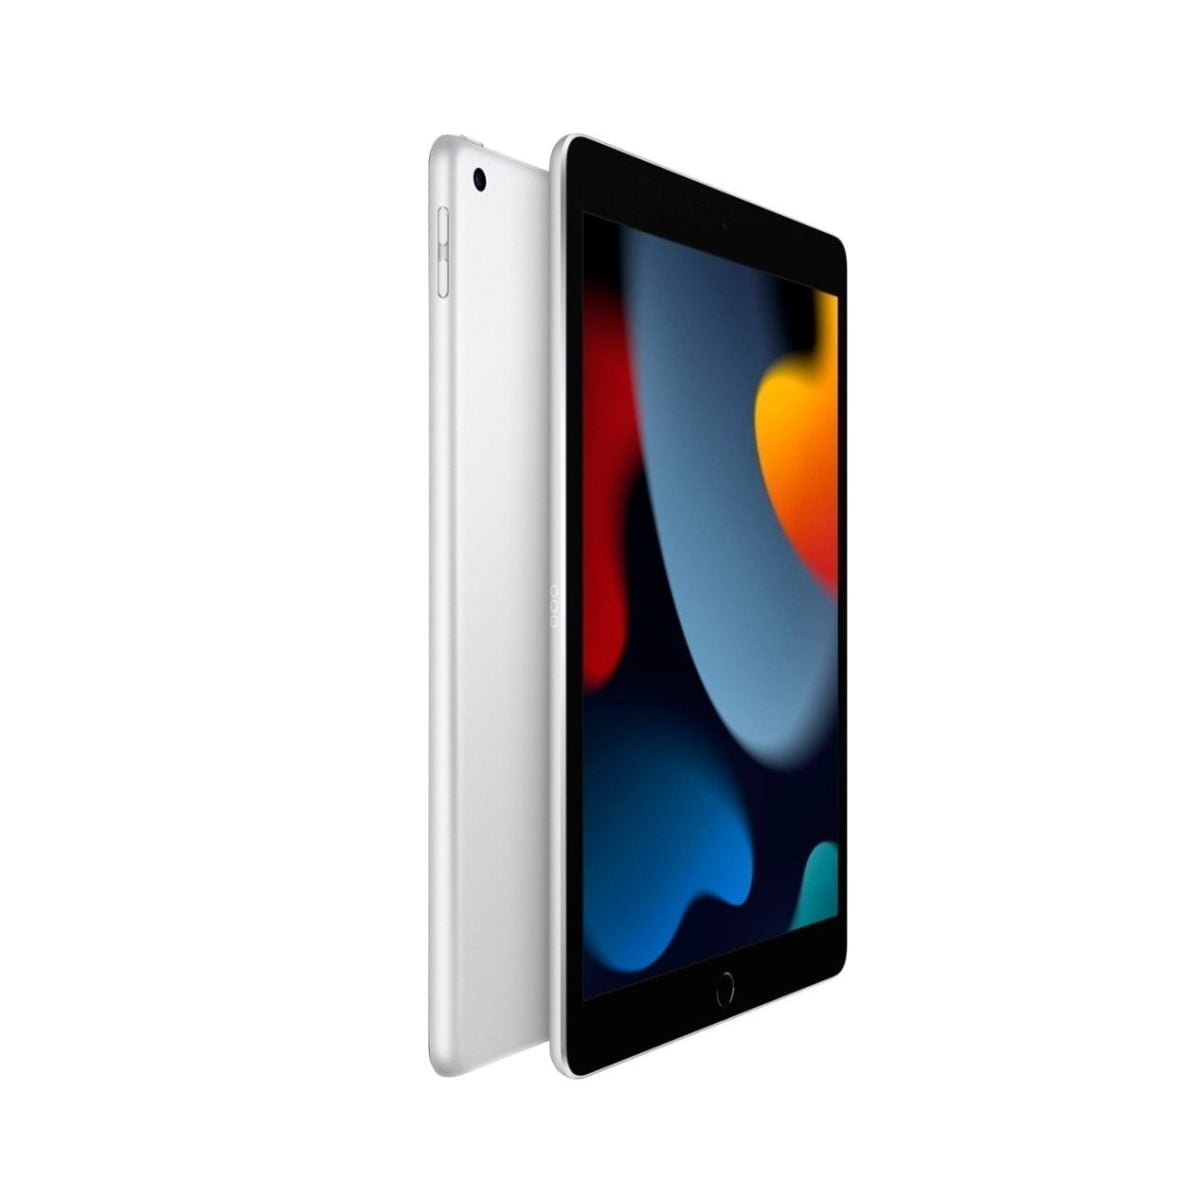 4901868Cv11D Apple &Lt;H1&Gt;Apple 10.2-Inch Ipad (9Th Generation) With Wi-Fi - 256Gb - Silver&Lt;/H1&Gt; Https://Www.youtube.com/Watch?V=Loaocx5Xc9S Powerful. Easy To Use. Versatile. The New Ipad Has A Beautiful 10.2-Inch Retina Display, Powerful A13 Bionic Chip, An Ultra Wide Front Camera With Center Stage, And Works With Apple Pencil And The Smart Keyboard.¹ Ipad Lets You Do More, More Easily. All For An Incredible Value. Ipad Apple 10.2-Inch Ipad (9Th Generation) With Wi-Fi - 256Gb - Silver